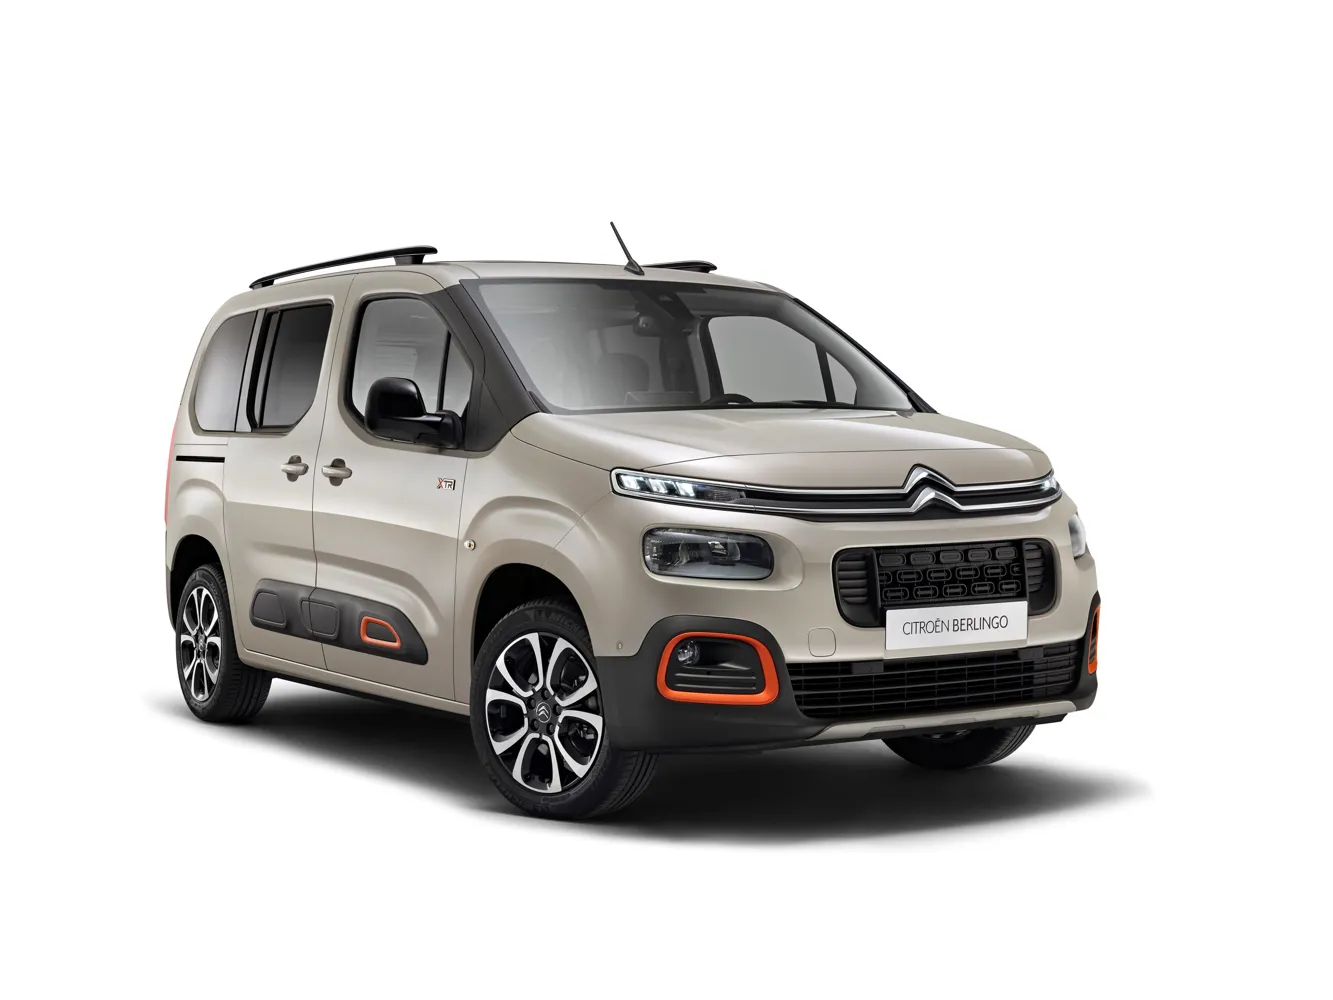 New Citroen Berlingo available to order from £18,850